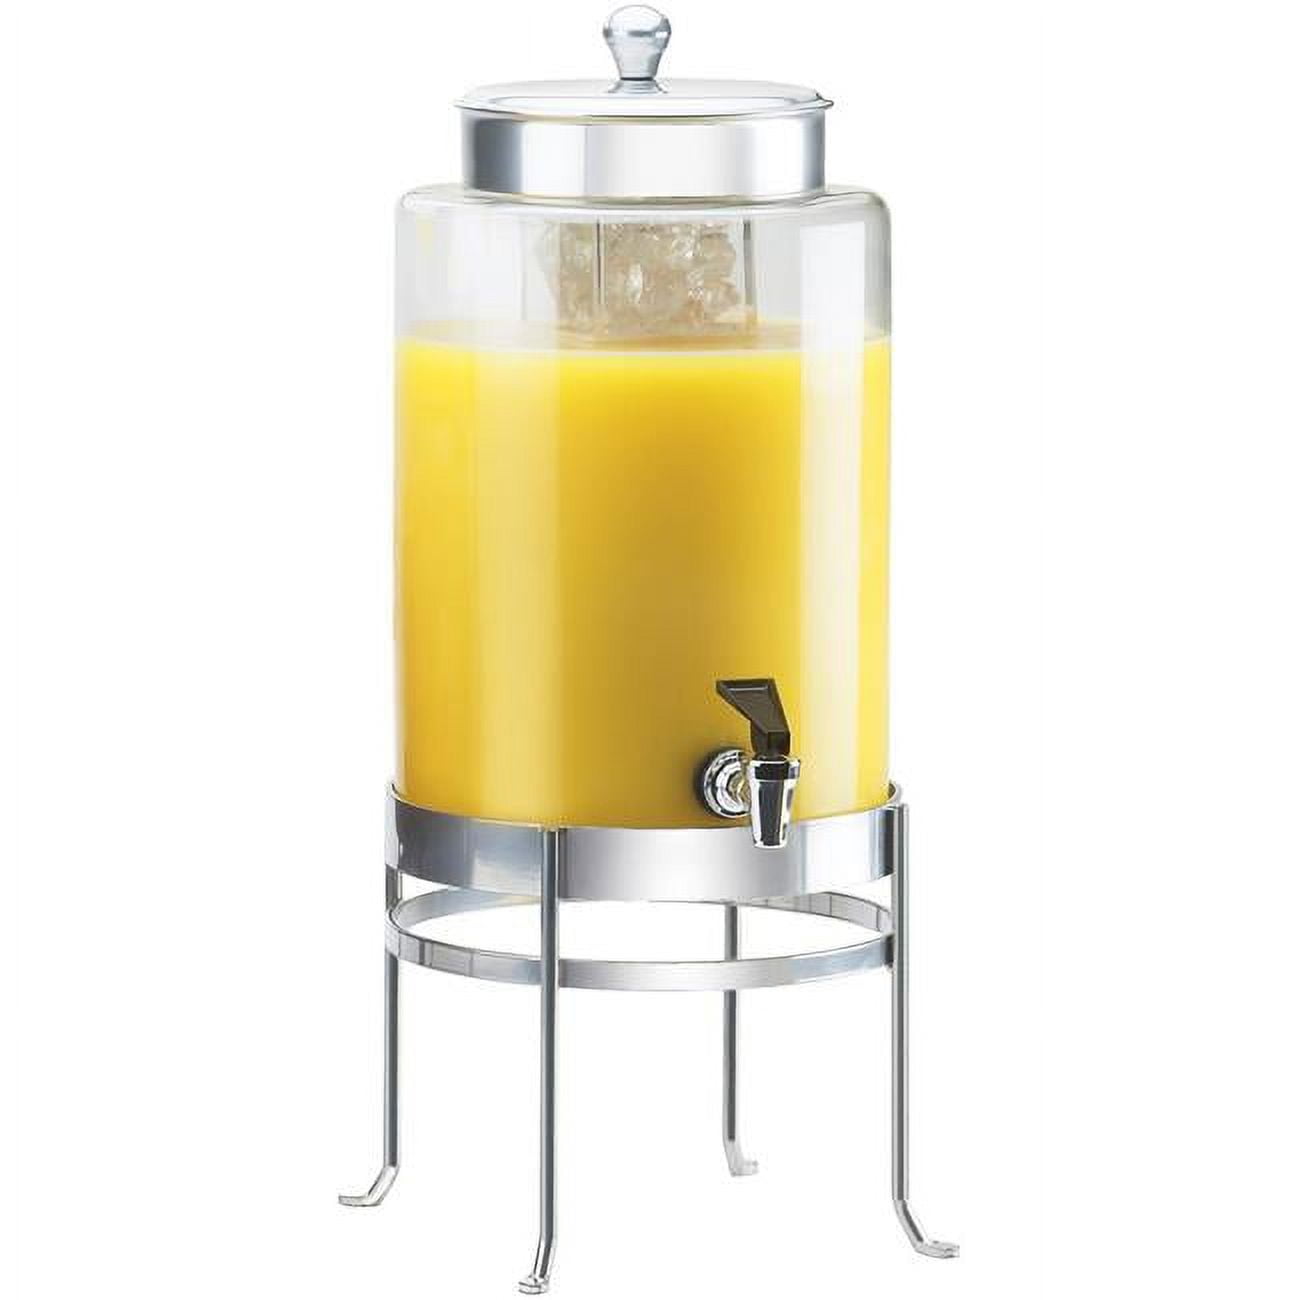 1580-2inf-74 2 Gal Silver Soho Glass Beverage Dispenser With Infusion Chamber - 10 X 12 X 20.5 In.